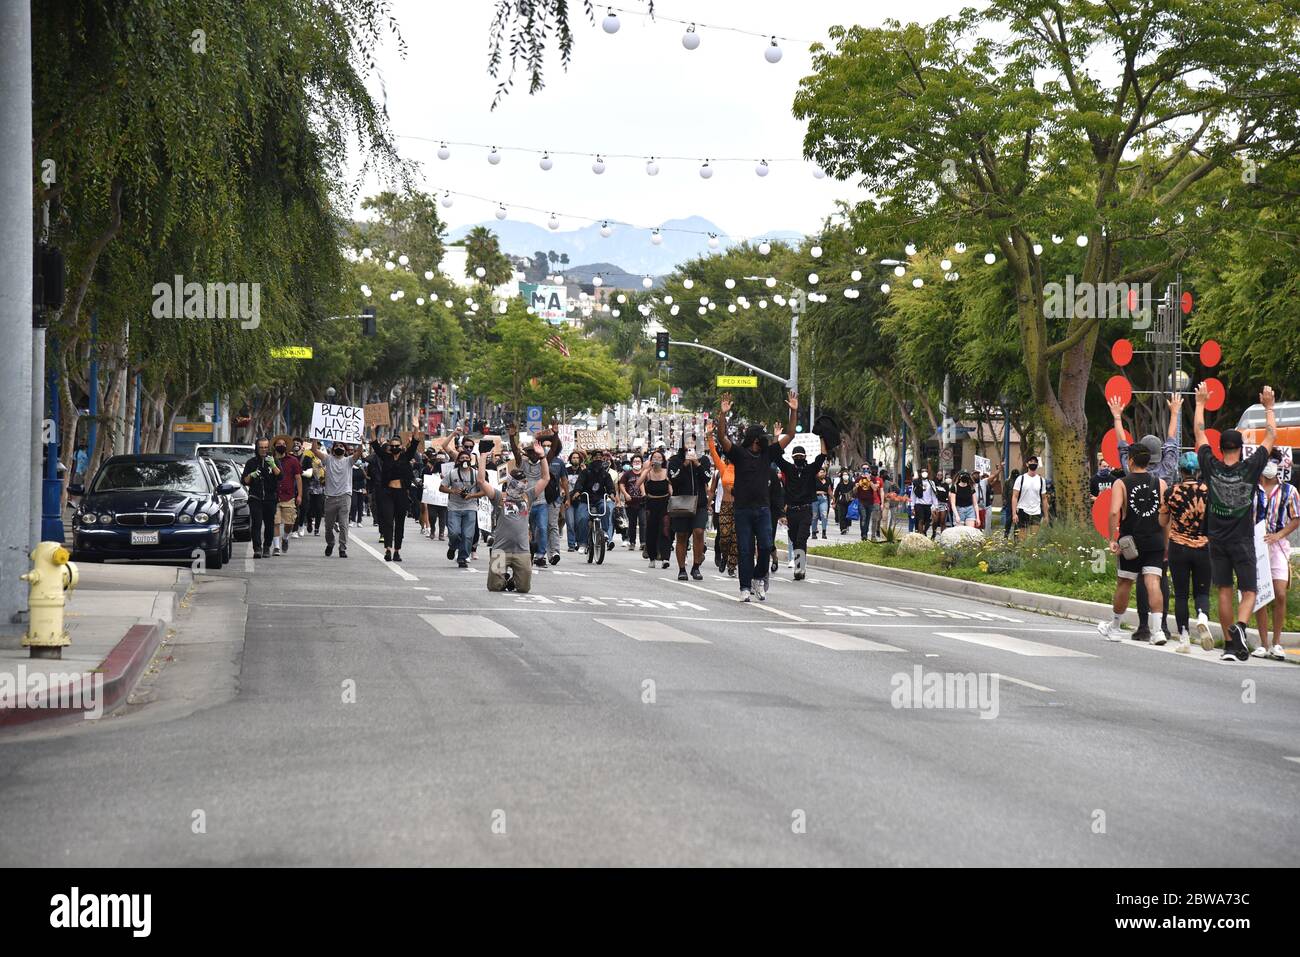 West Hollywood, CA/USA - May 30, 2020: Black Lives Matter protesters demanding justice for George Floyd on Santa Monica Blvd Stock Photo